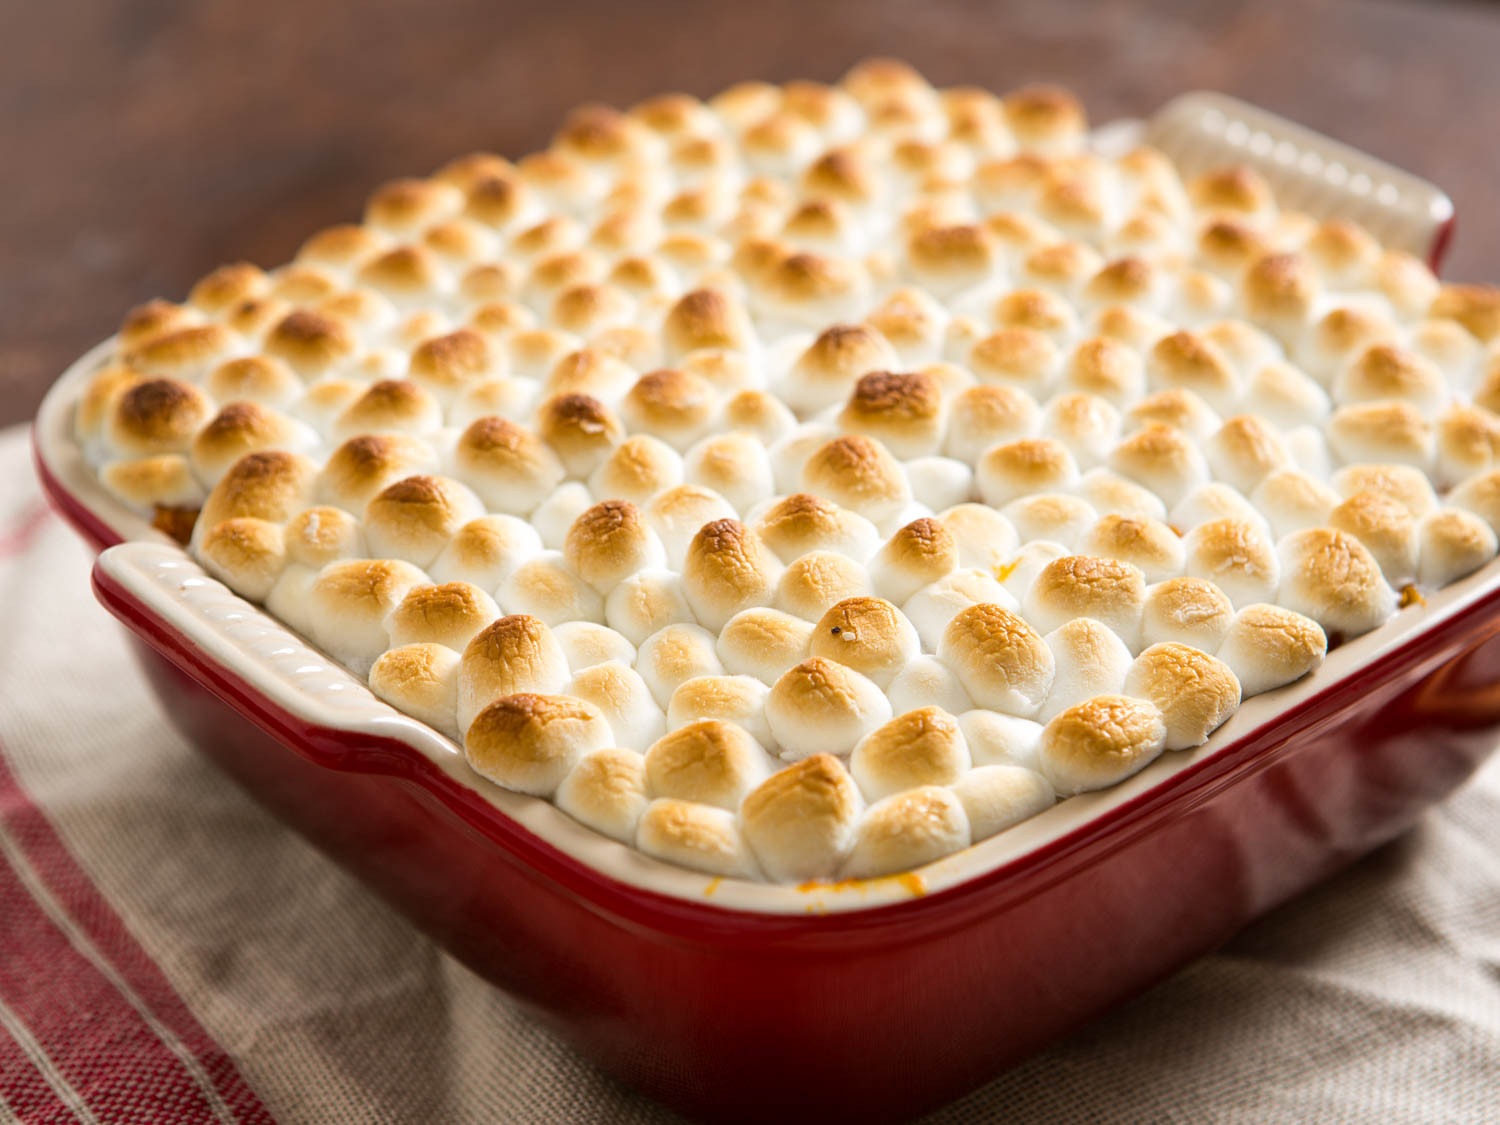 Thanksgiving Sweet Potatoes With Marshmallows
 Meet the Grown Up Sweet Potato Casserole That Your Inner